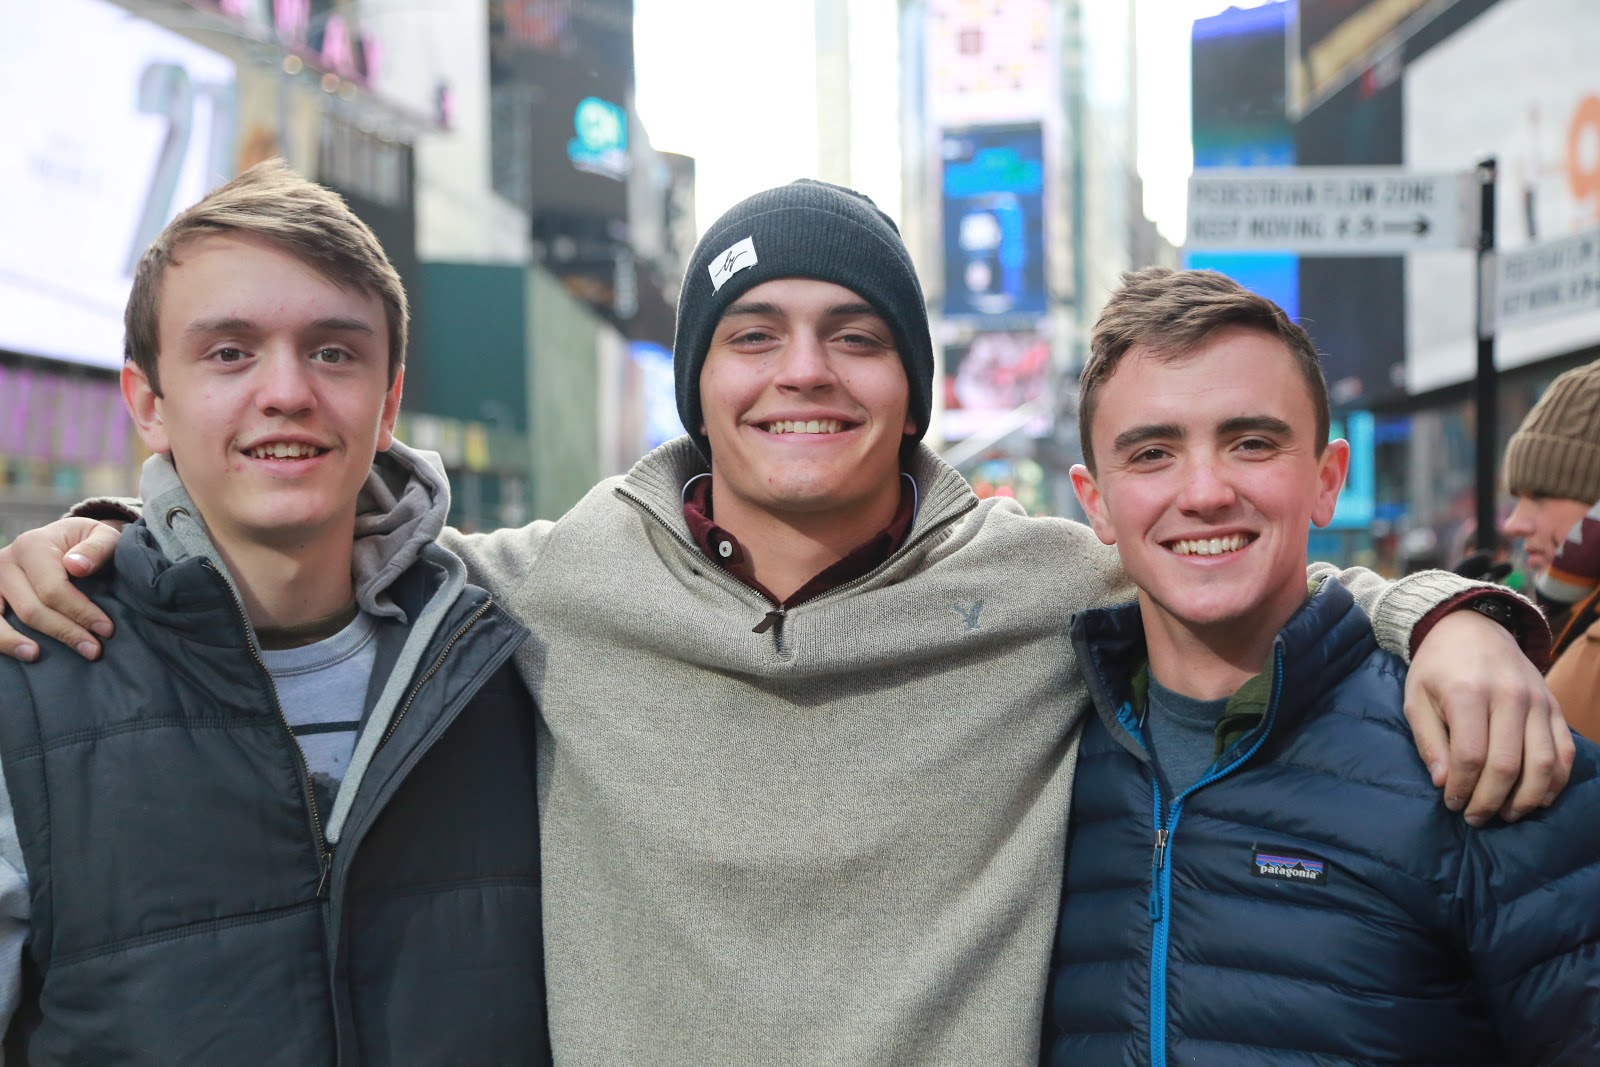 Making memories in Times Square